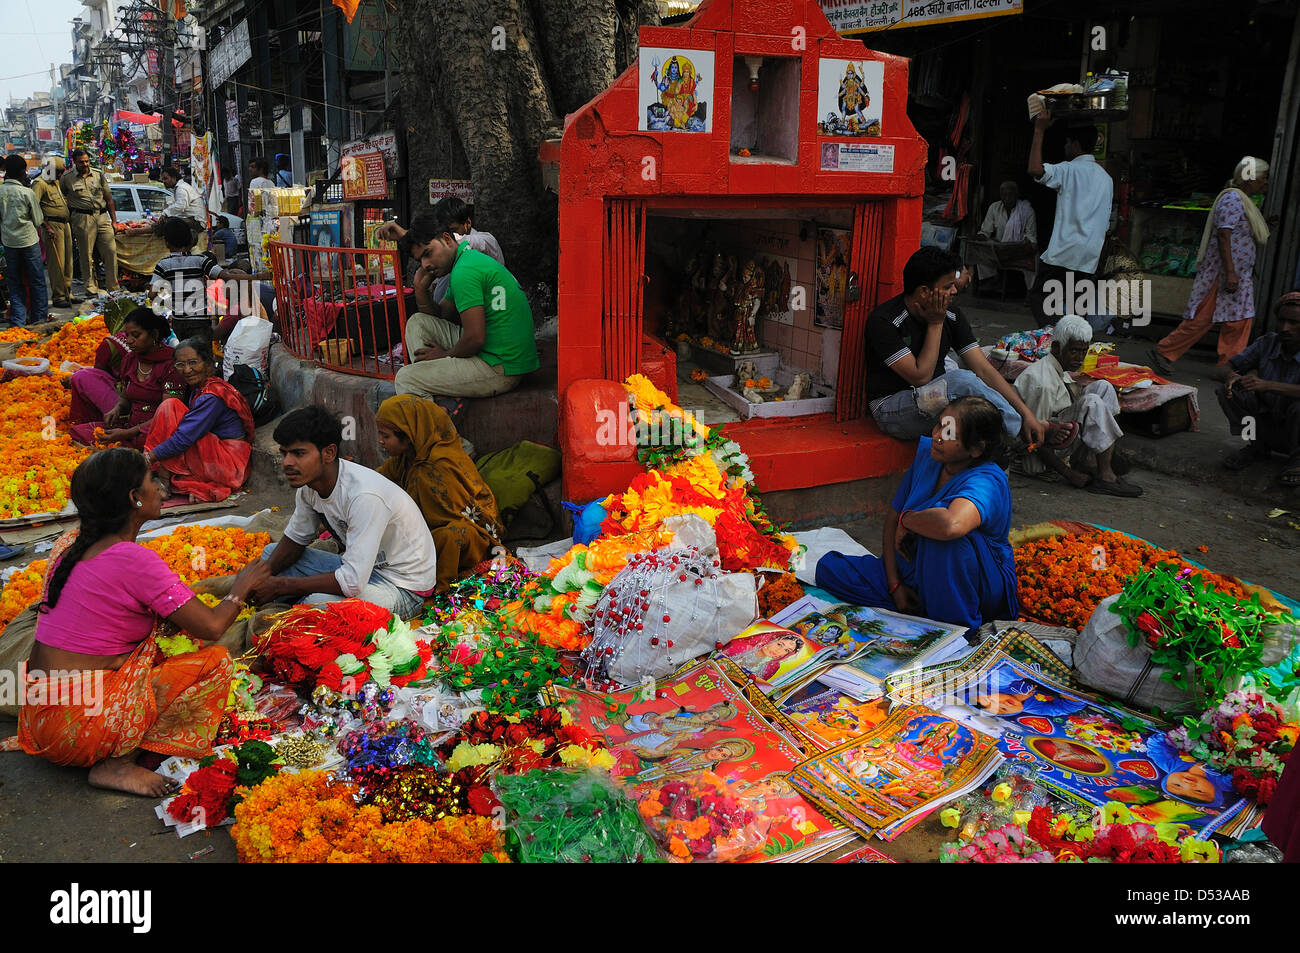 A day before Diwali festival at crowded market in Old Delhi Stock Photo